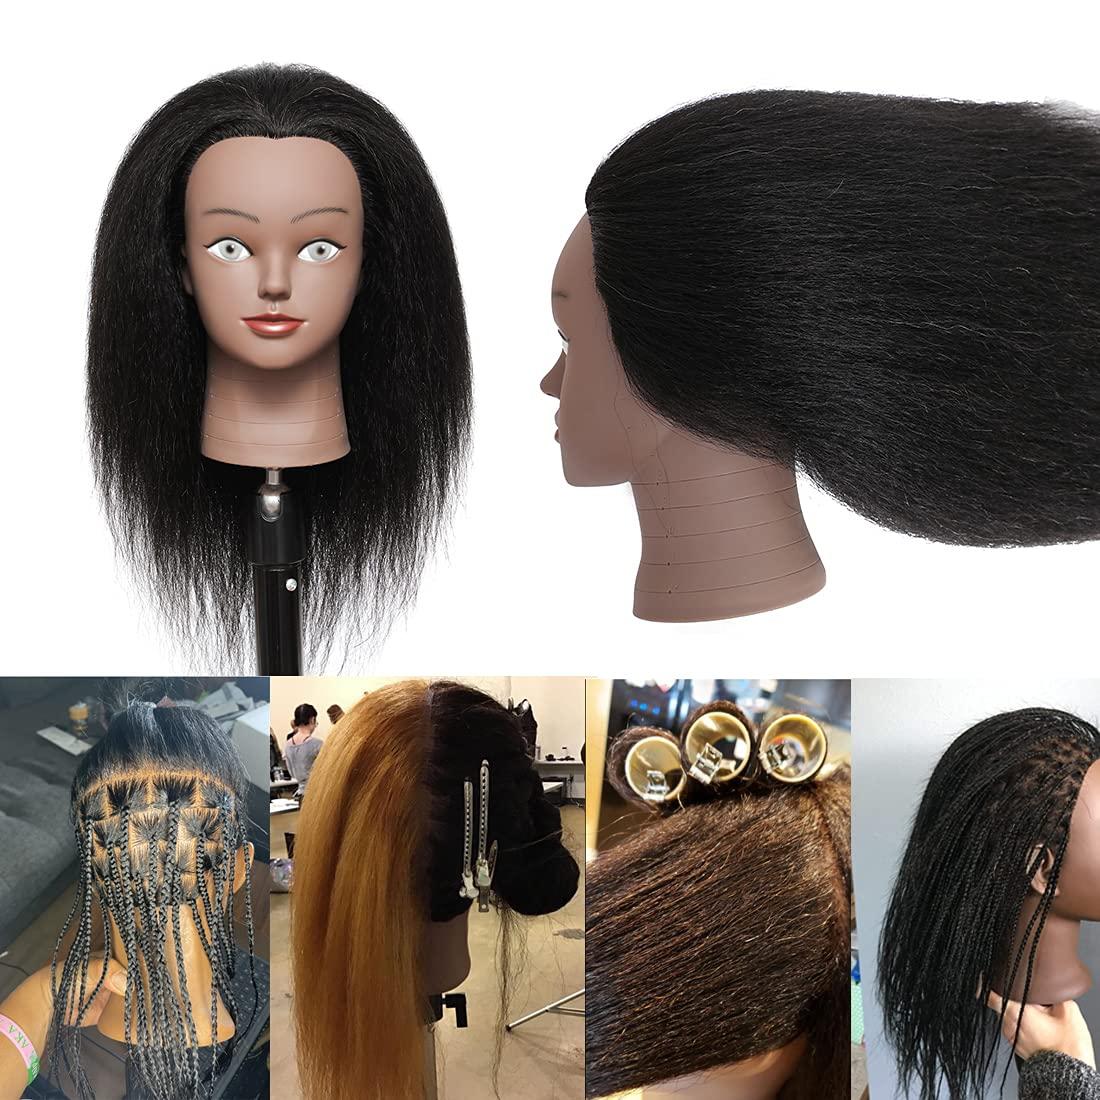 100% Salon Real Human Hair Training Head Hairdressing Practice Mannequin  Doll